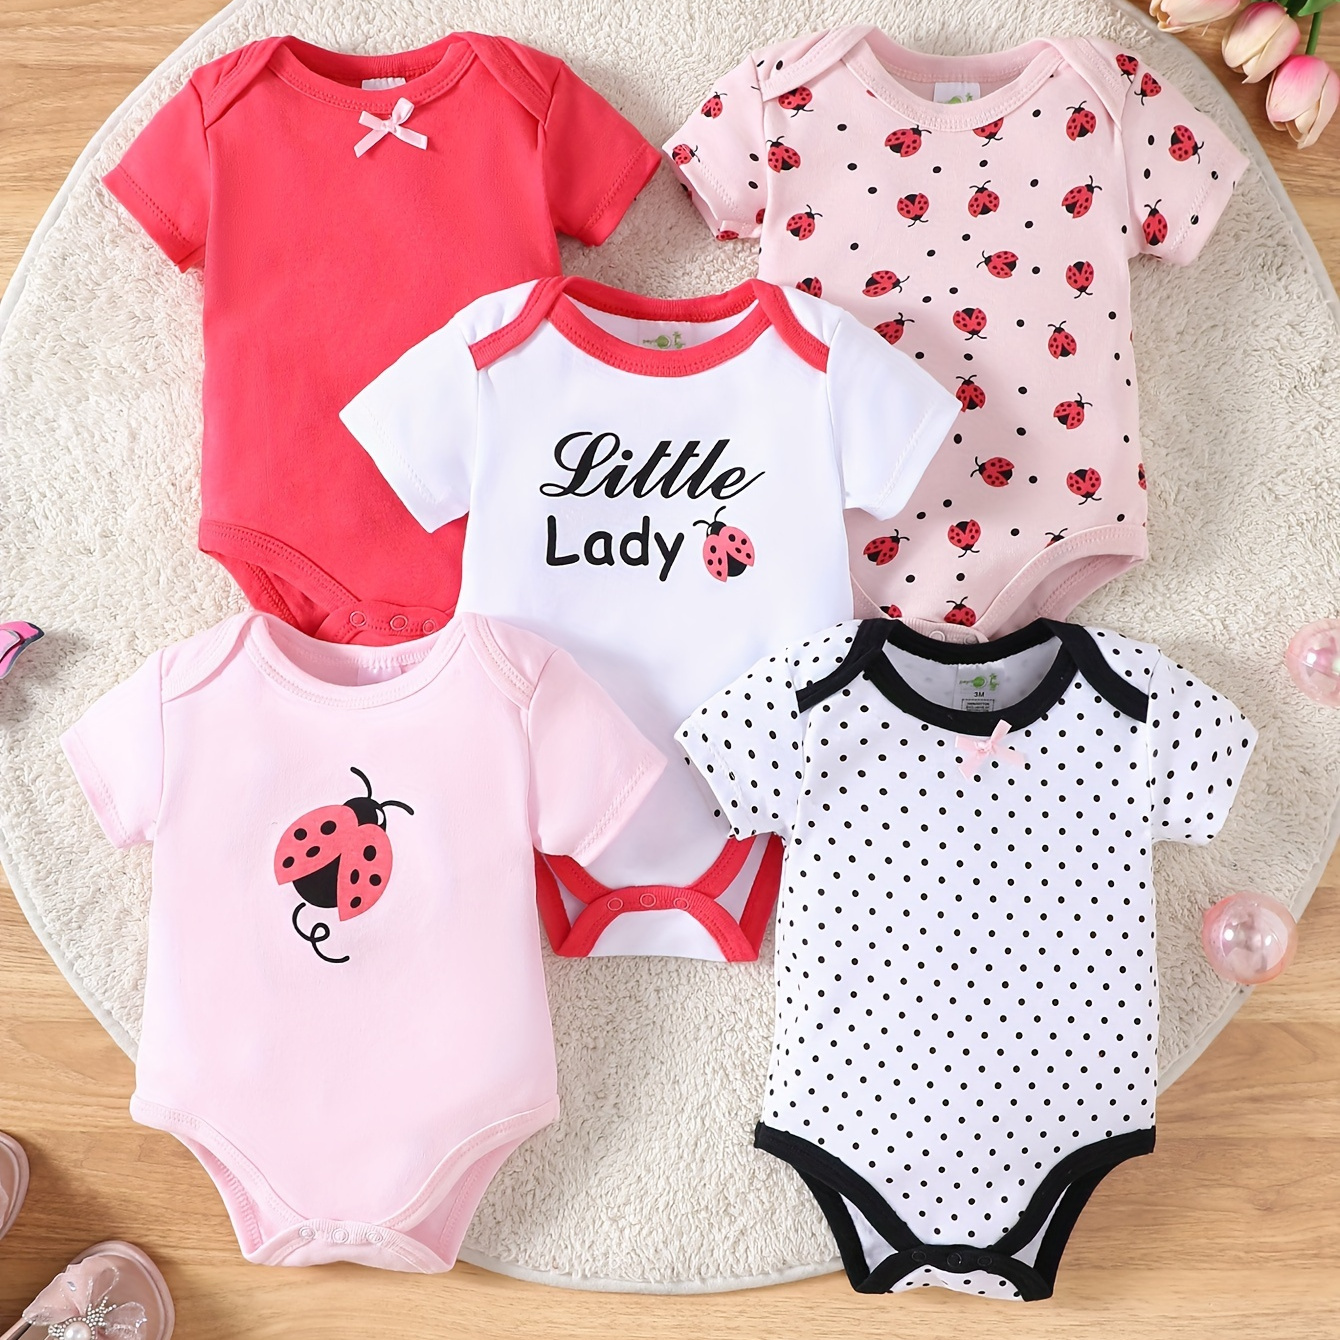 

5pcs Baby's Cartoon Ladybug/unicorn Print Cotton Triangle Bodysuit, Soft Casual Short Sleeve Onesie, Toddler & Infant Girl's Clothing For Summer, As Gift